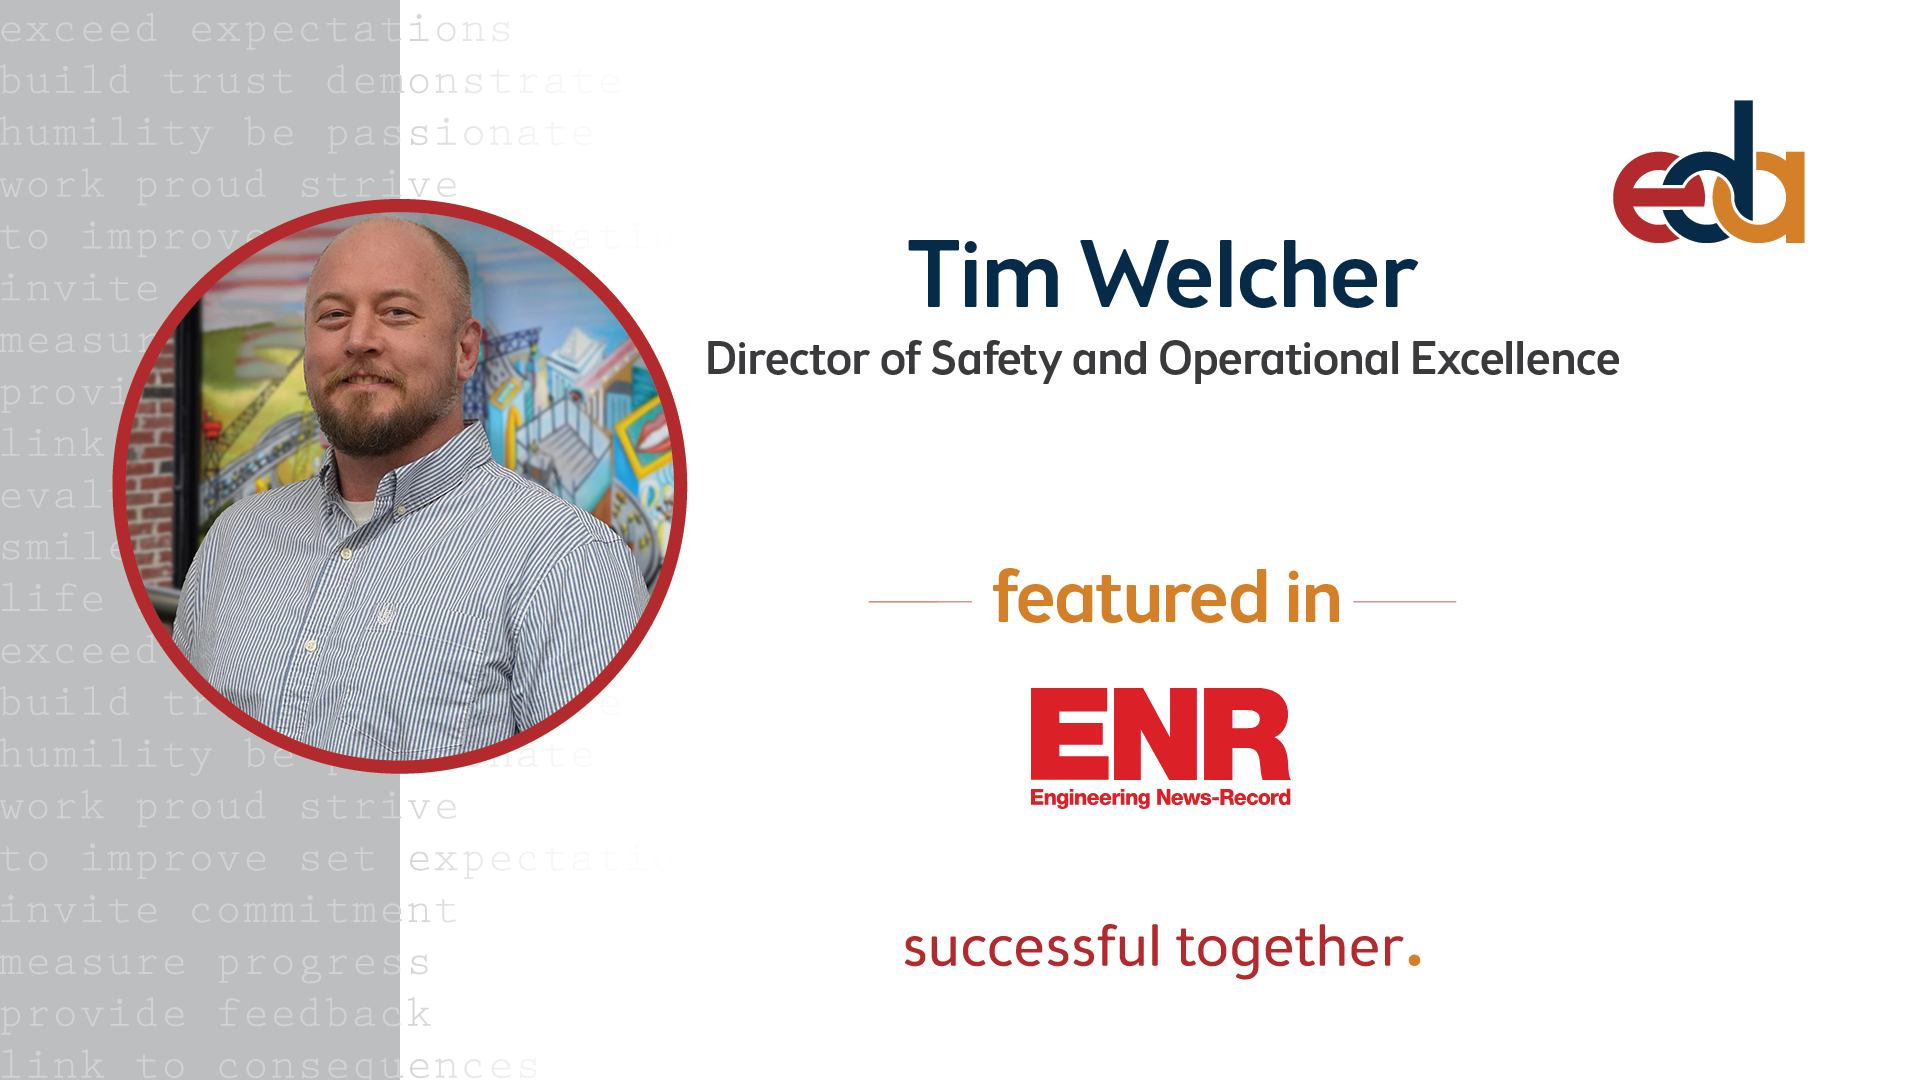 Tim Welcher, Director of Safety and Operational Excellence, featured in ENR.